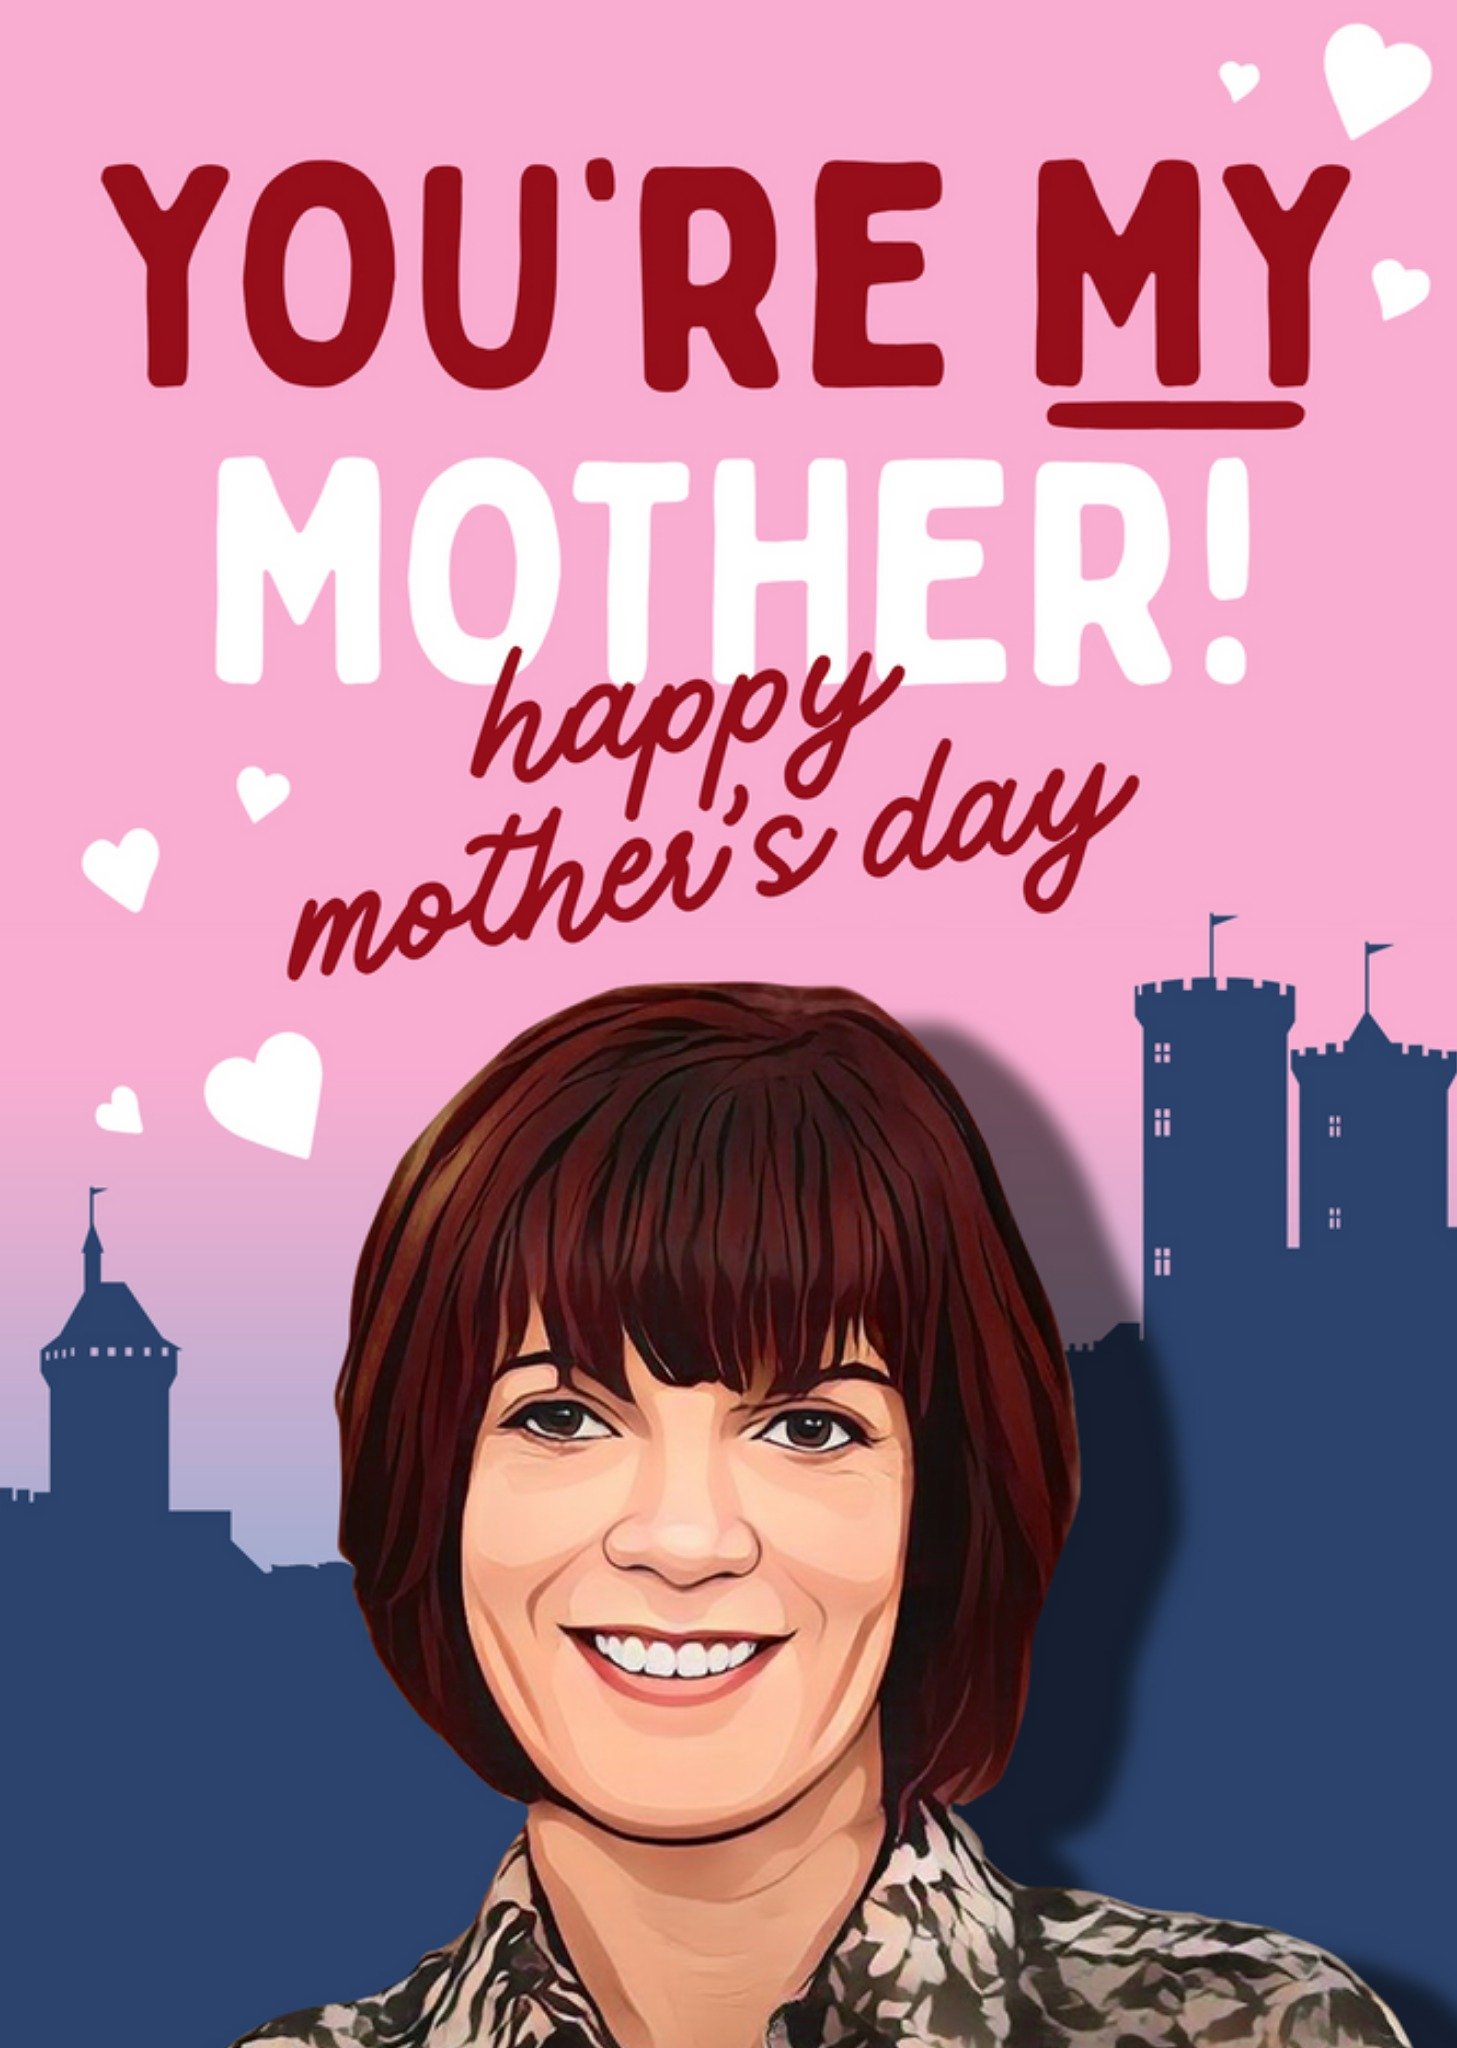 Moonpig Funny Topical Faithful You're My Mother Mother's Day Card Ecard